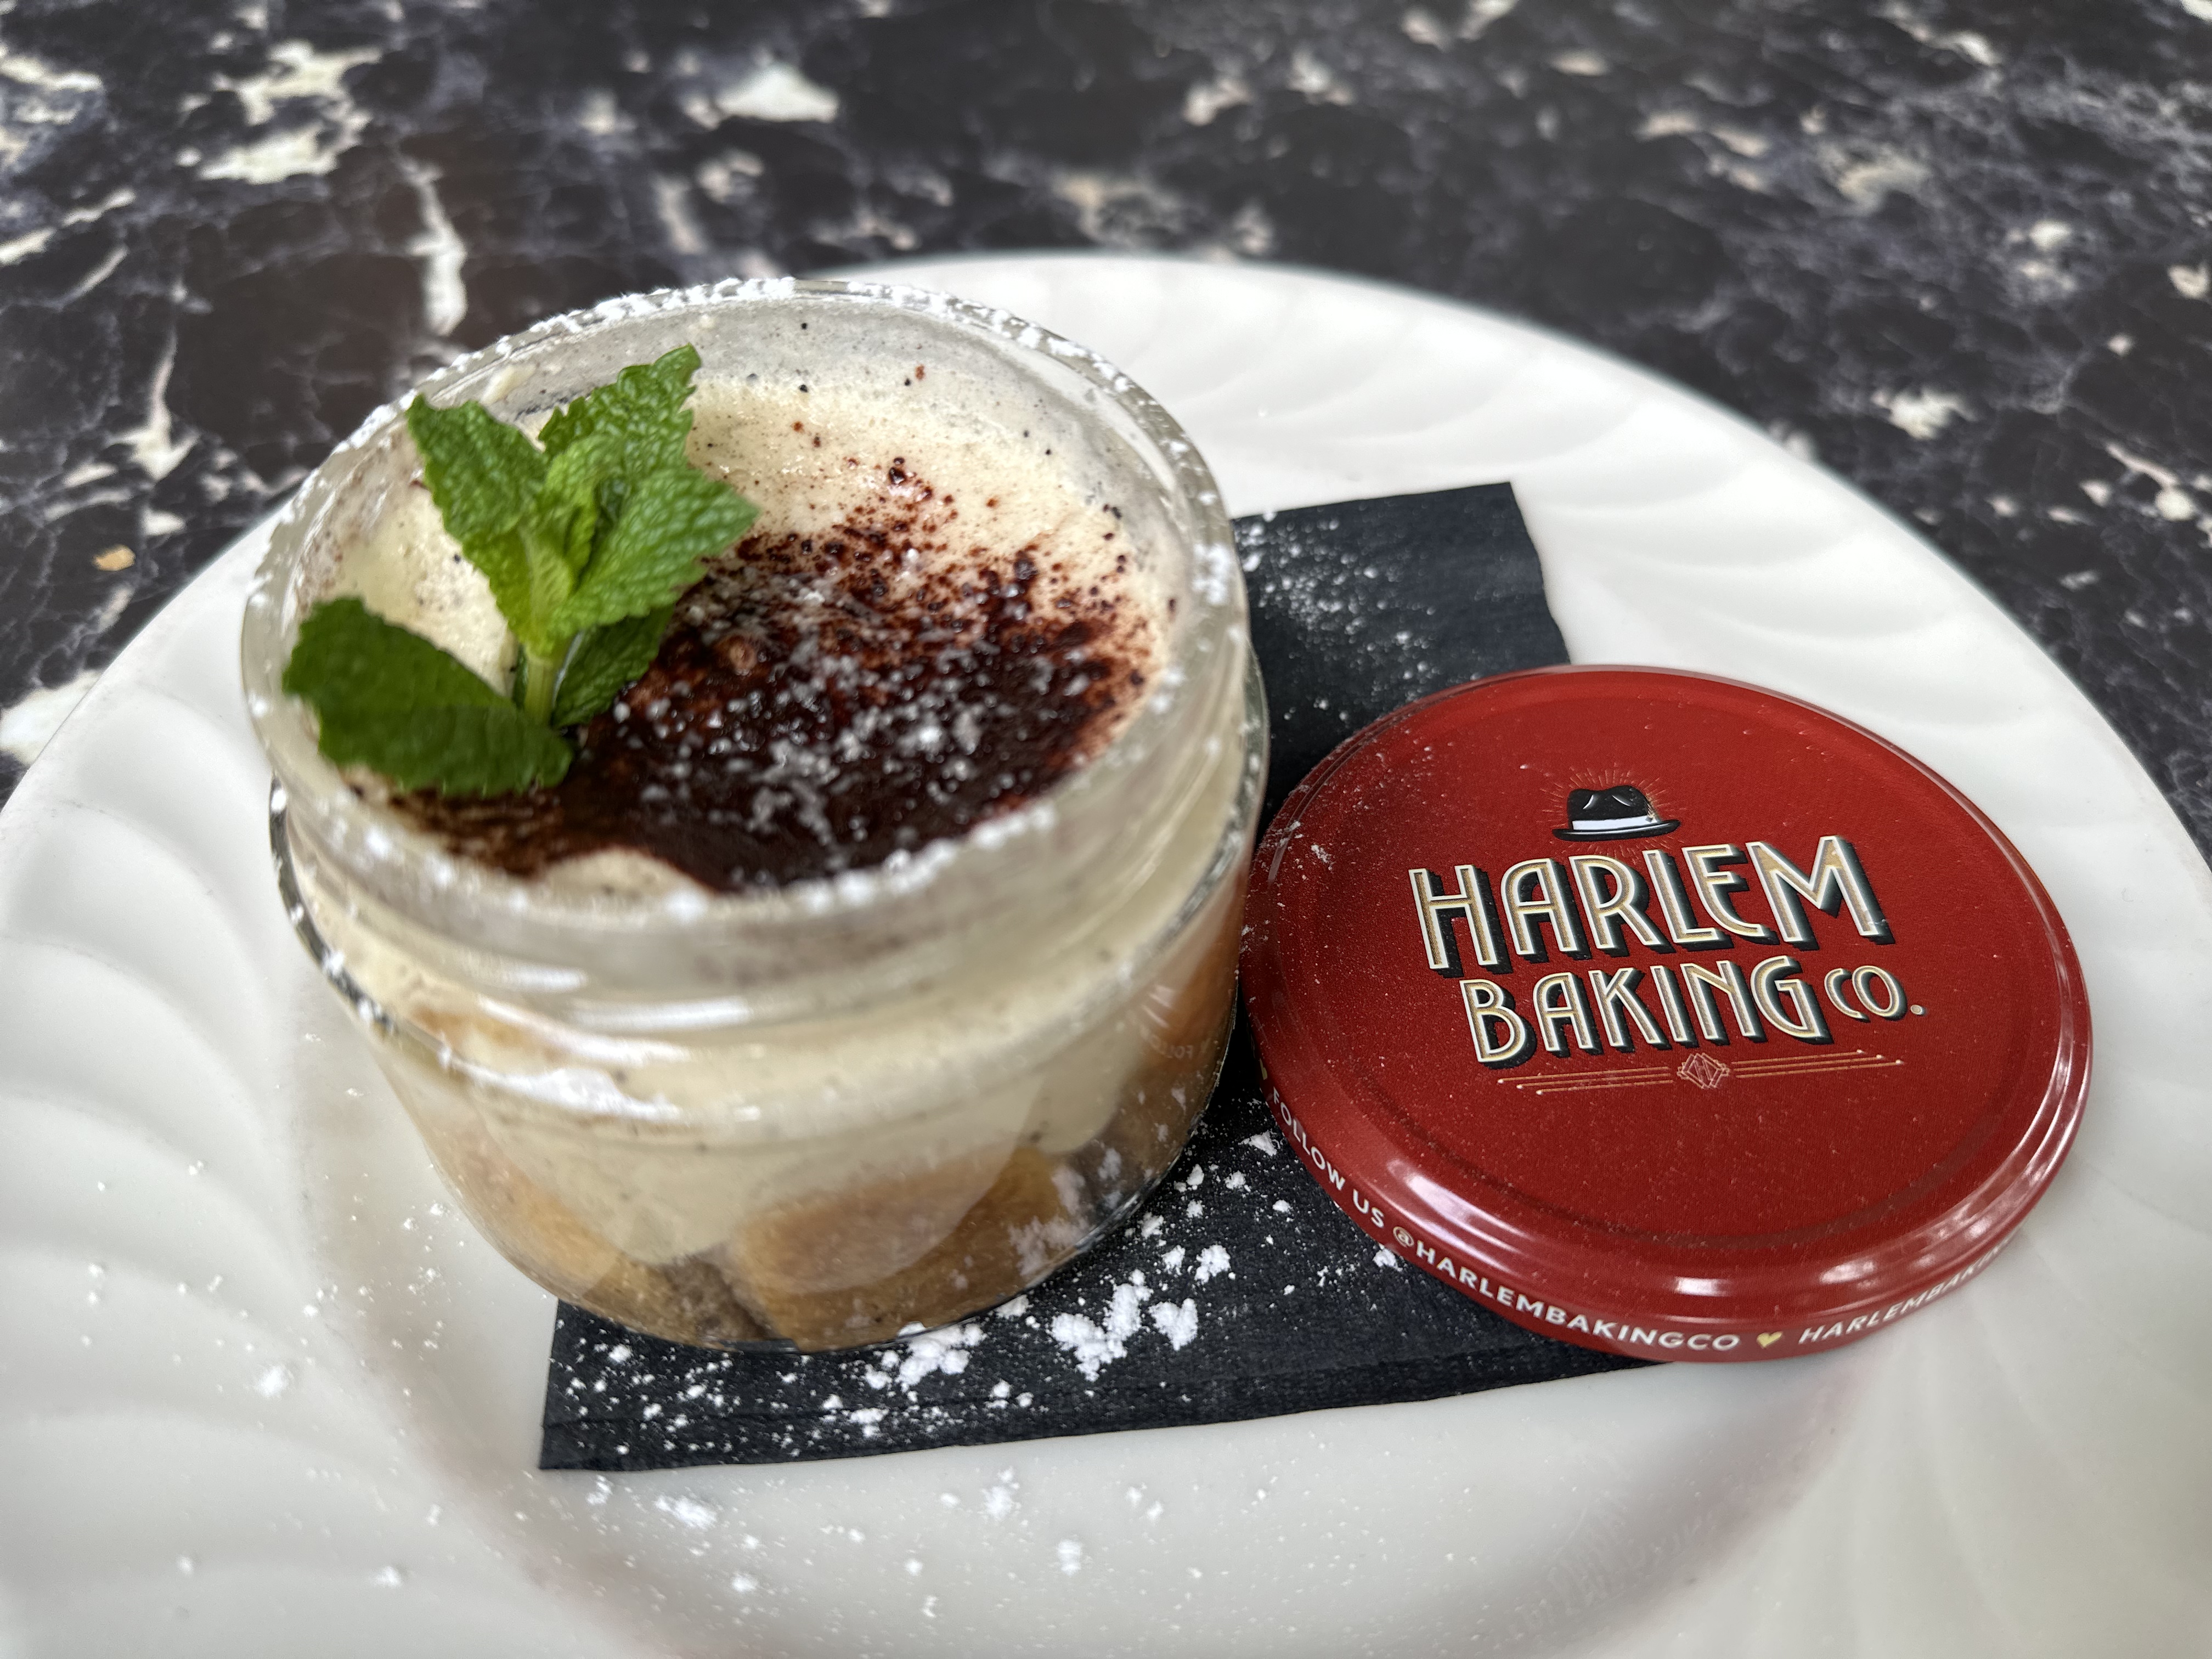 The pandemic got Charles thinking about how to transport his popular puddings — and VOILA... Harlem Baking Co.